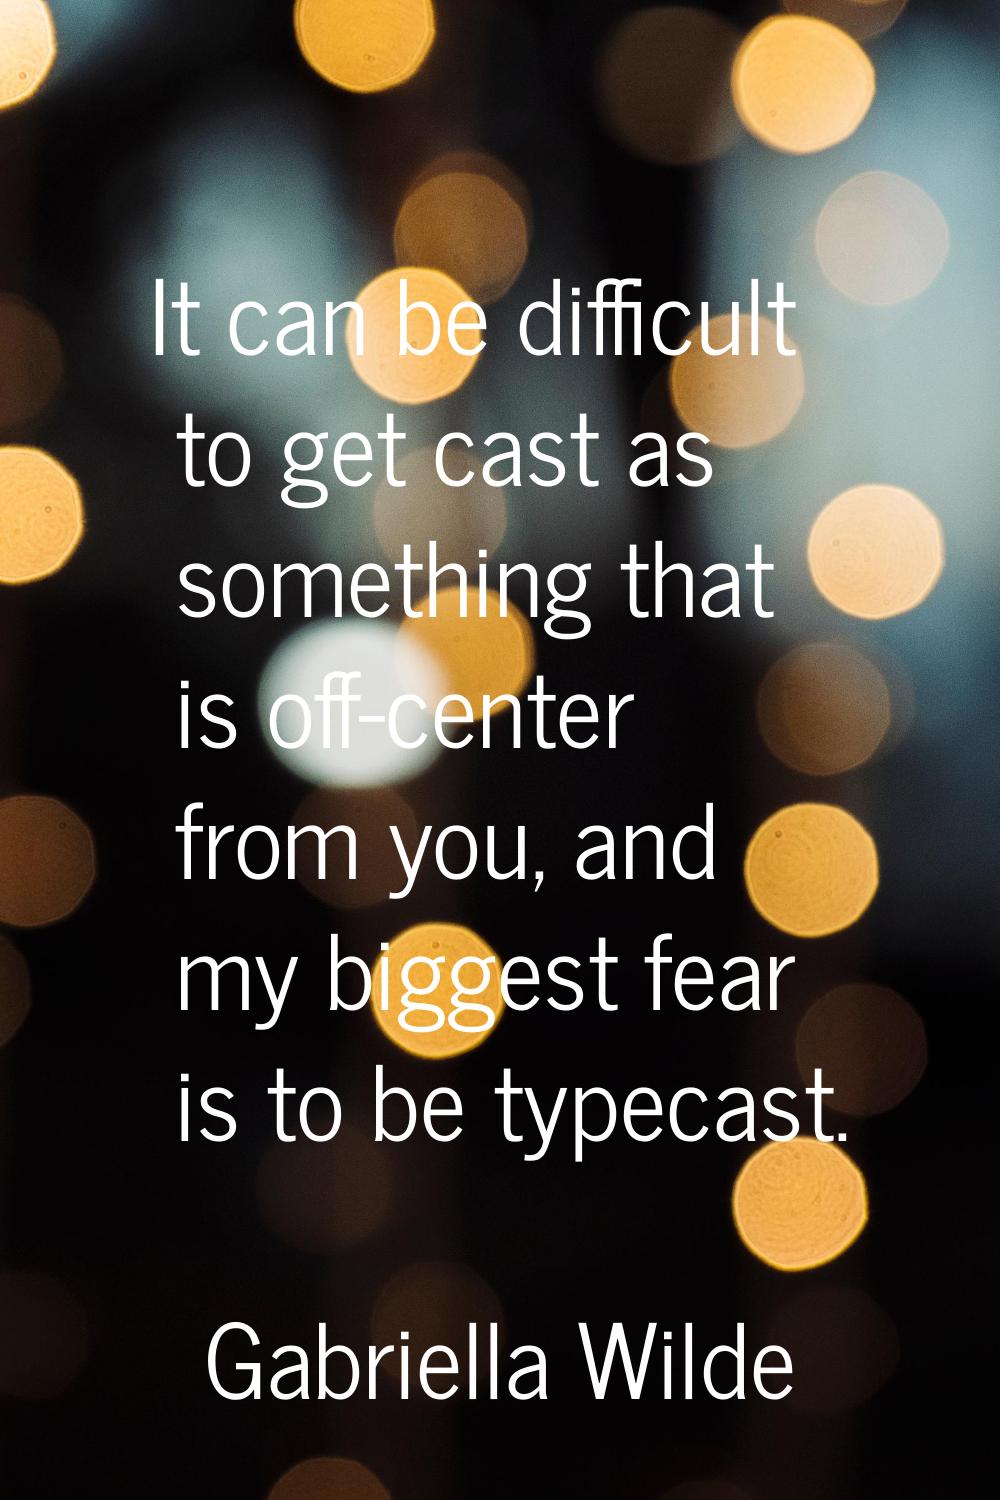 It can be difficult to get cast as something that is off-center from you, and my biggest fear is to